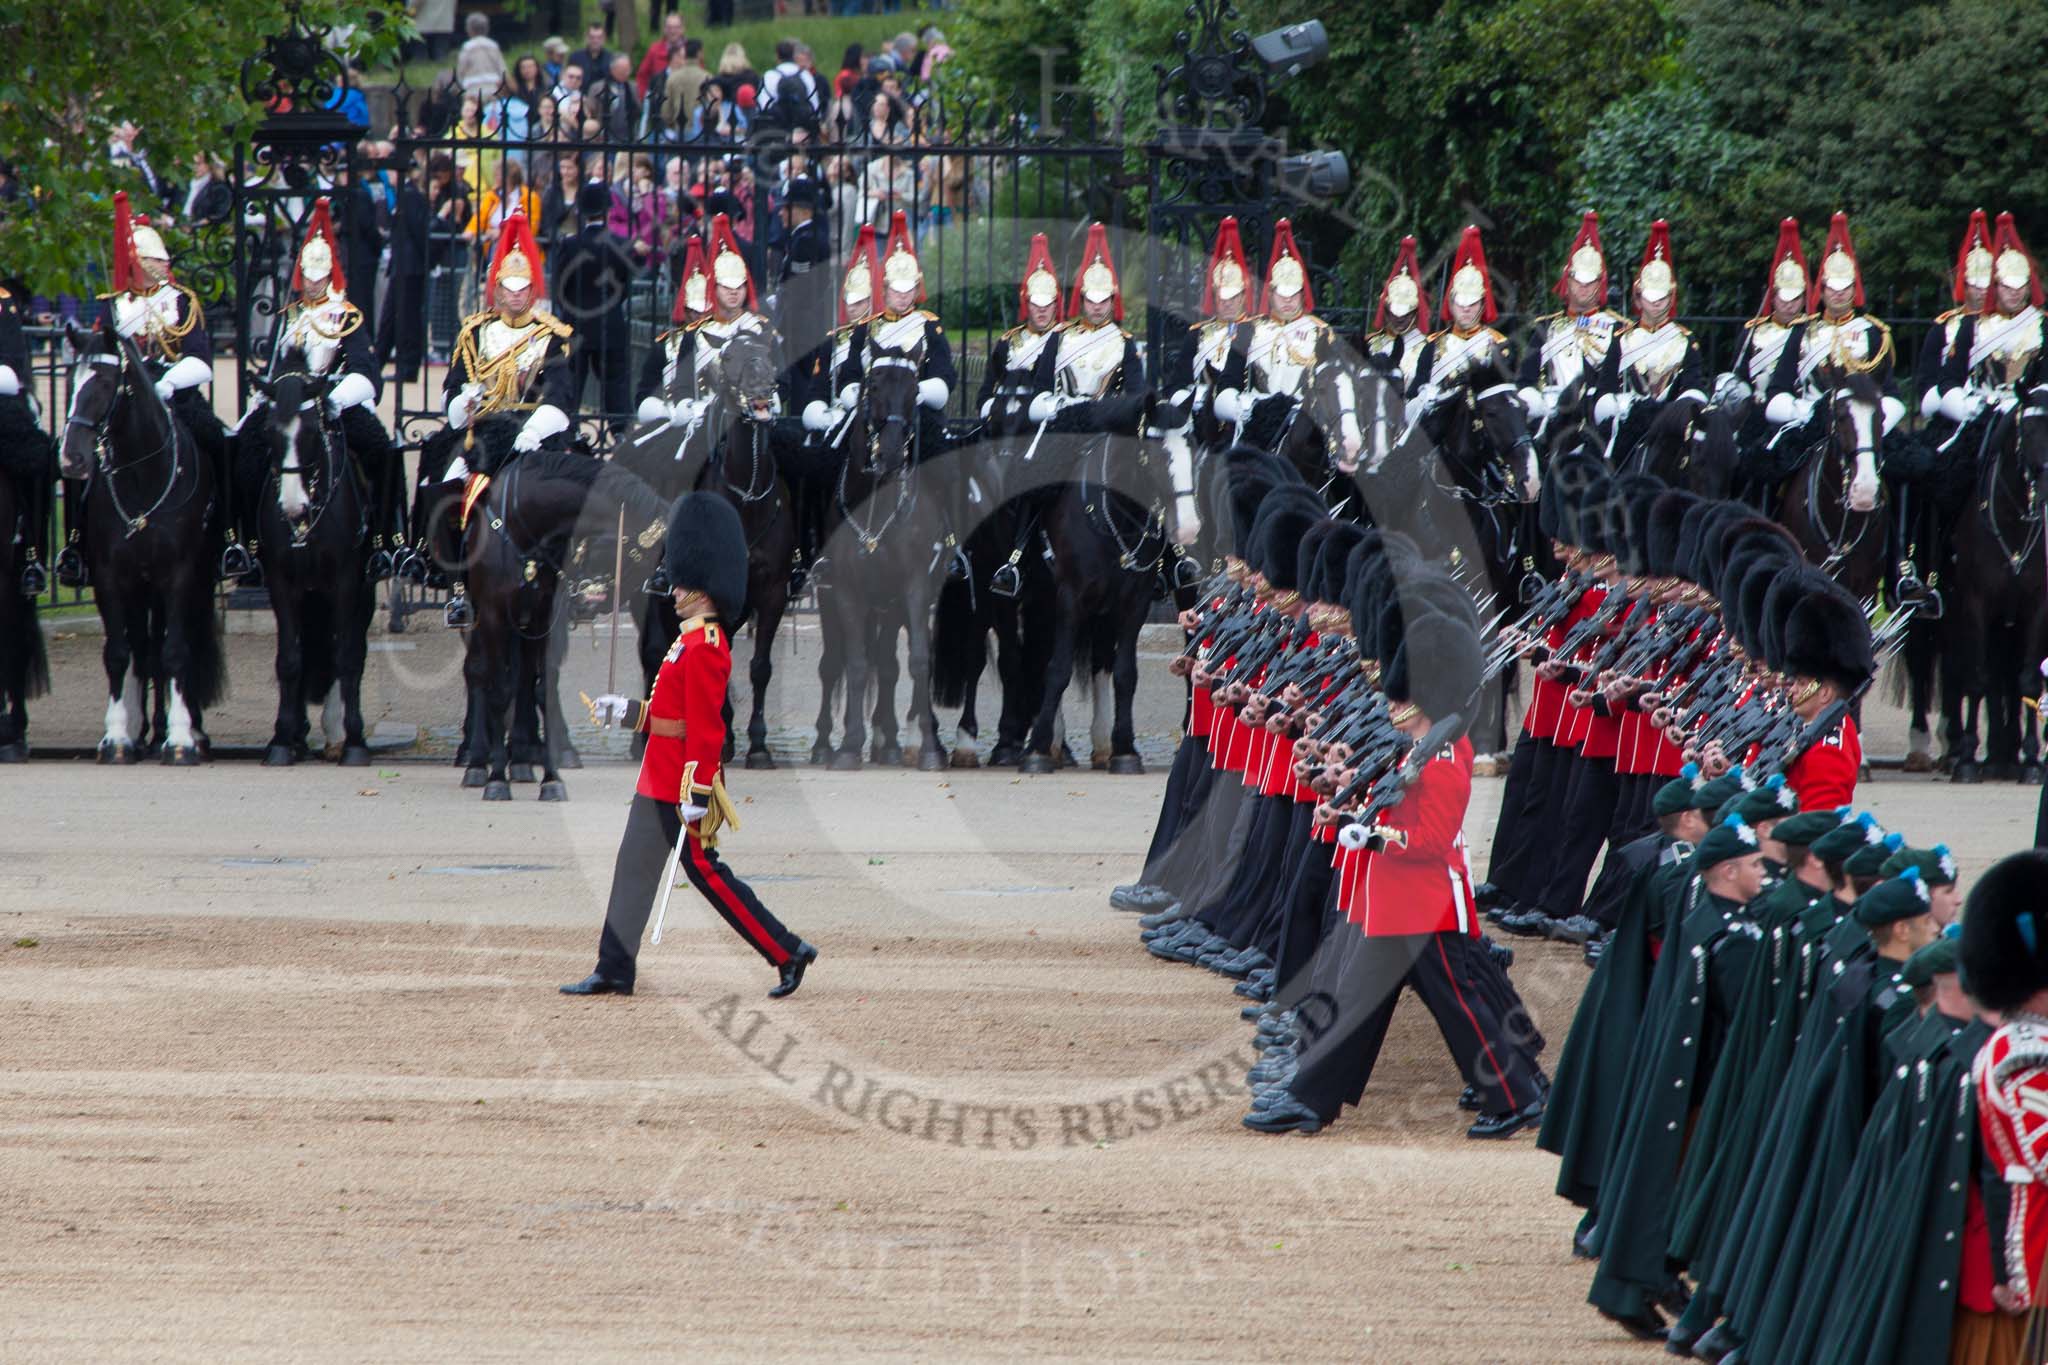 Trooping the Colour 2012: The Massed bands during the March Past. No. 5 Guard, 1st Battalion Irish Guards, marching to the left, with Irish Guards musicians (here the drummers and pipers) marching, as part os the Massed Bands, to the right..
Horse Guards Parade, Westminster,
London SW1,

United Kingdom,
on 16 June 2012 at 11:33, image #386